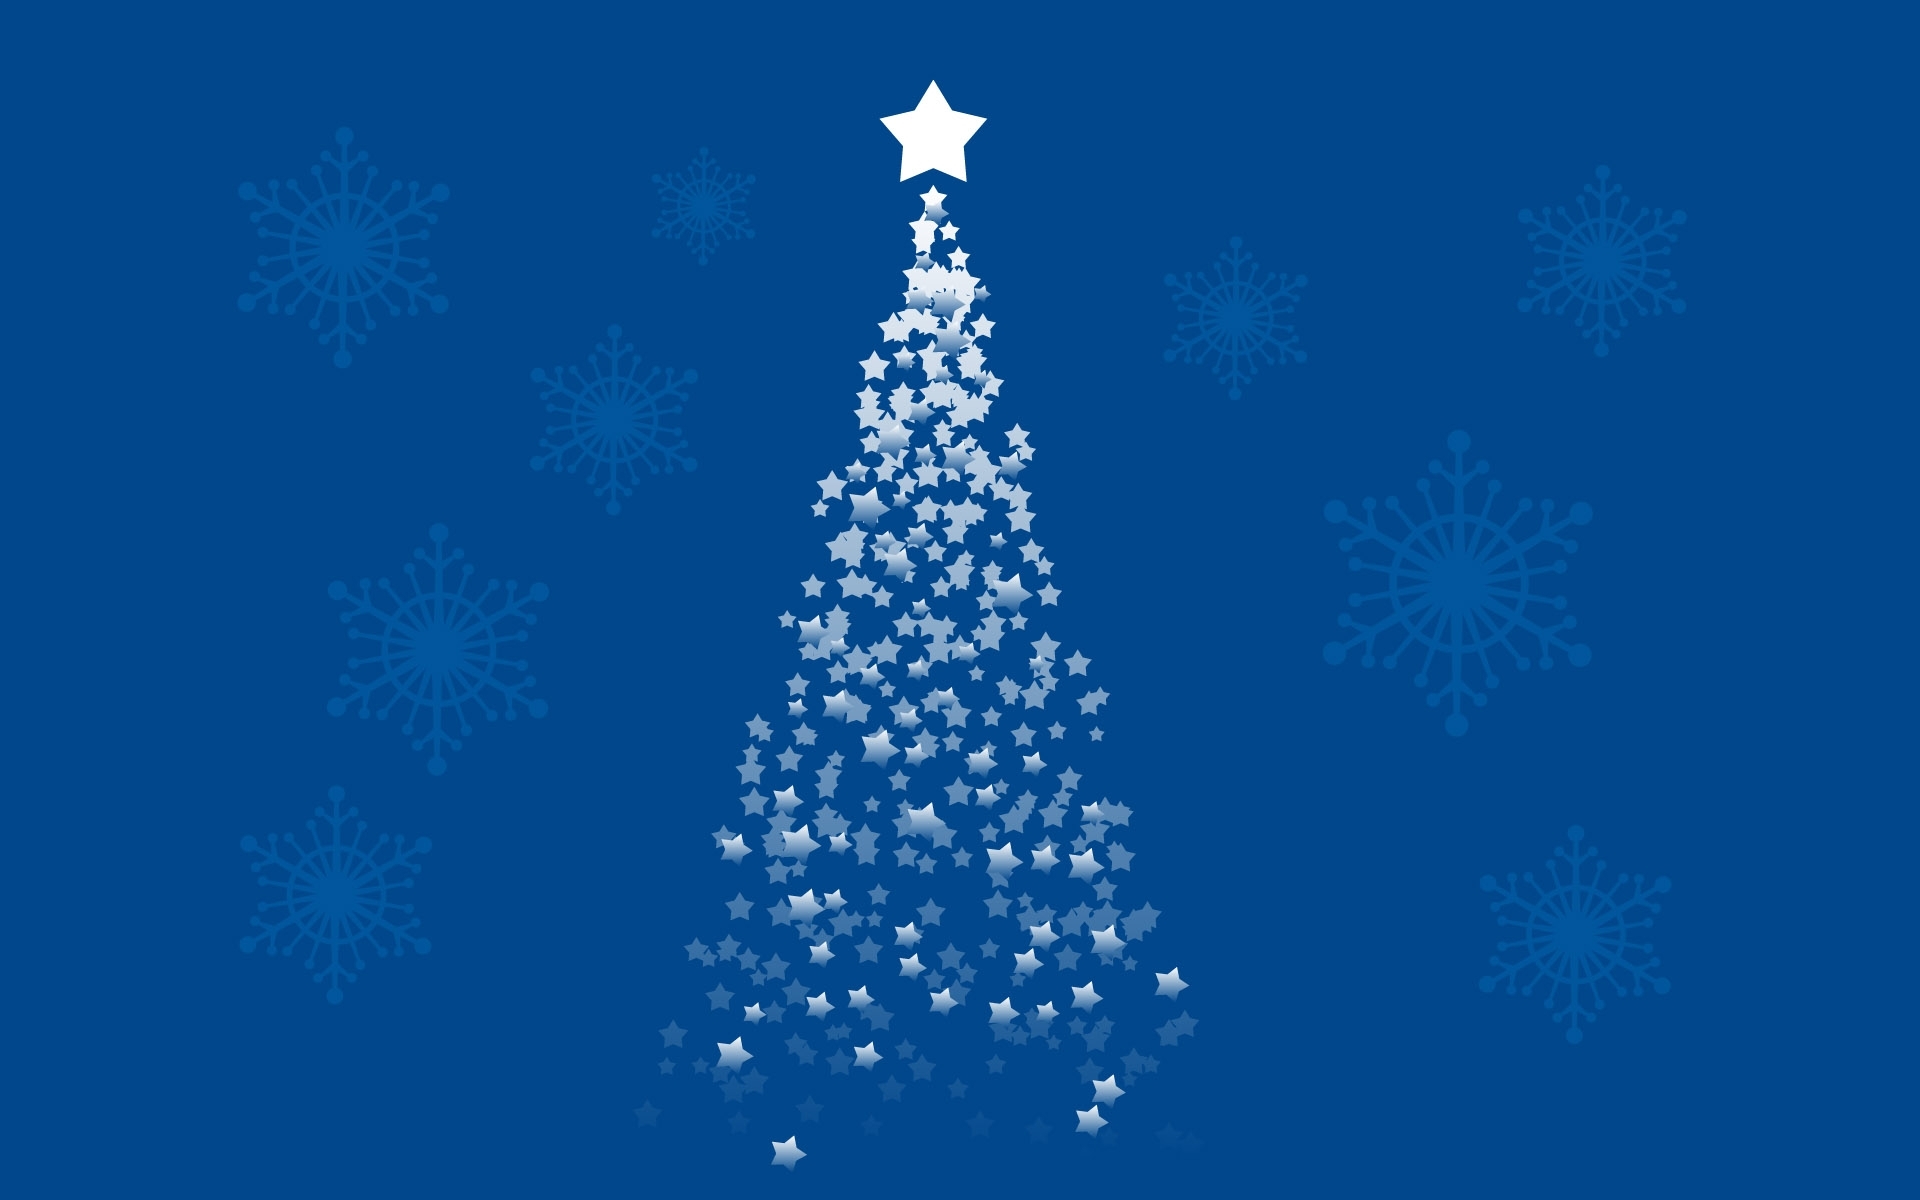 pictures, christmas xmas, holidays, stars, new year, fir trees, blue cellphone